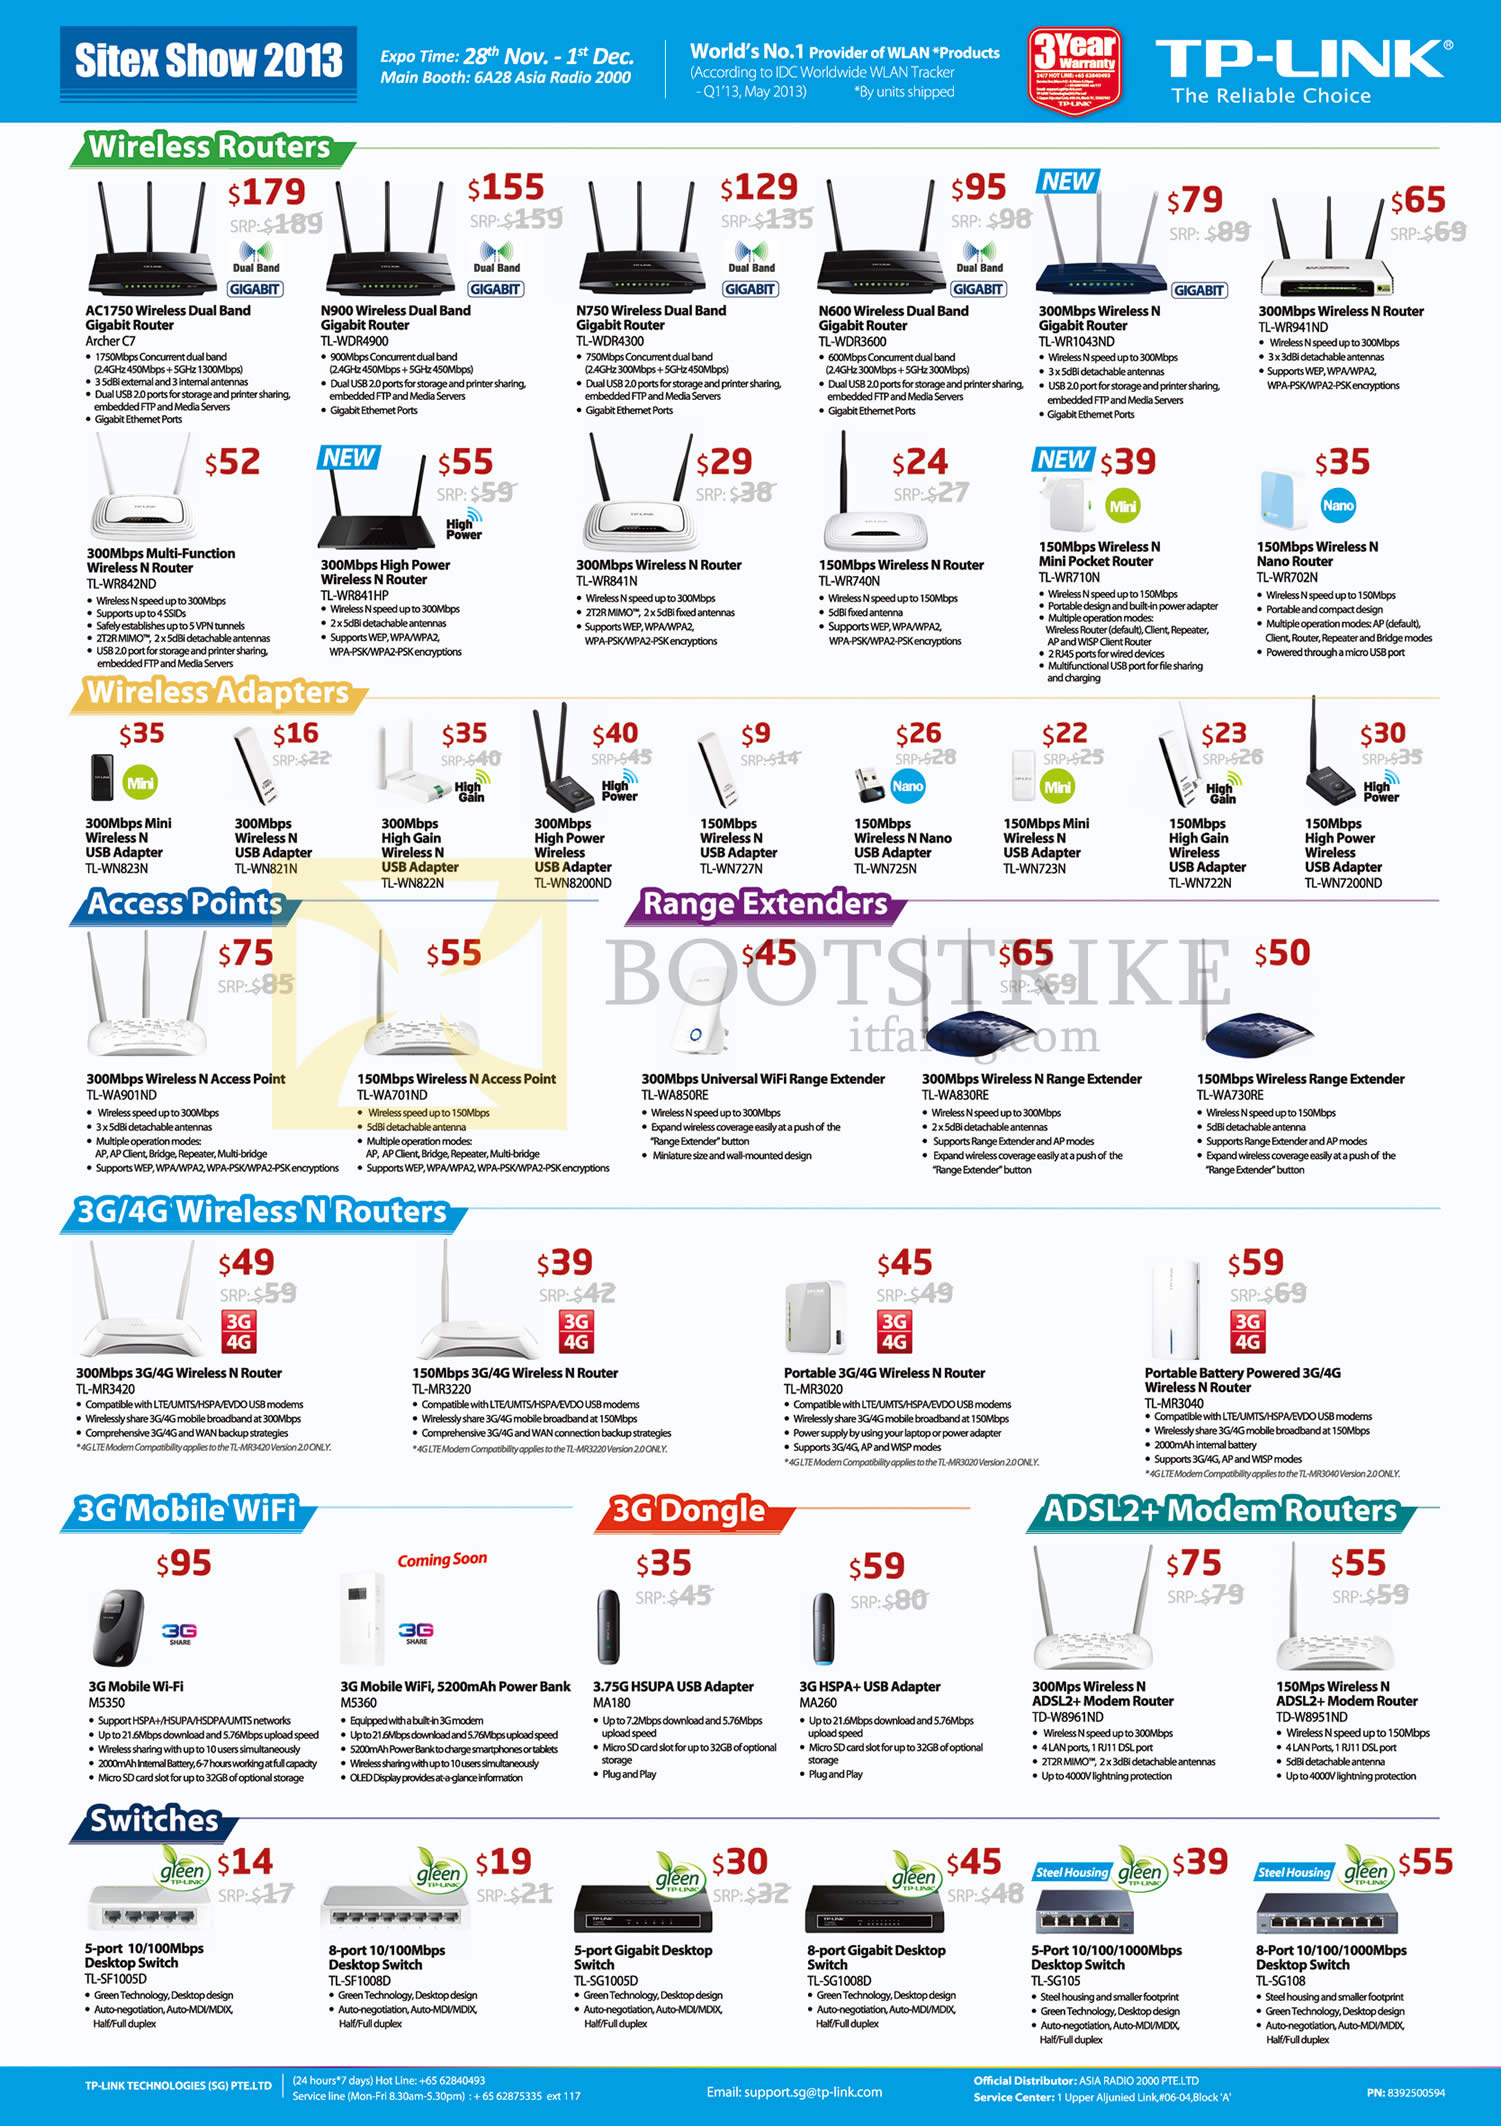 SITEX 2013 price list image brochure of Asia Radio TP-Link Networking Wireless Routers, USB Adapters, Access Points, Extenders, 3G 4G, Switches, ADSL Modem Routers